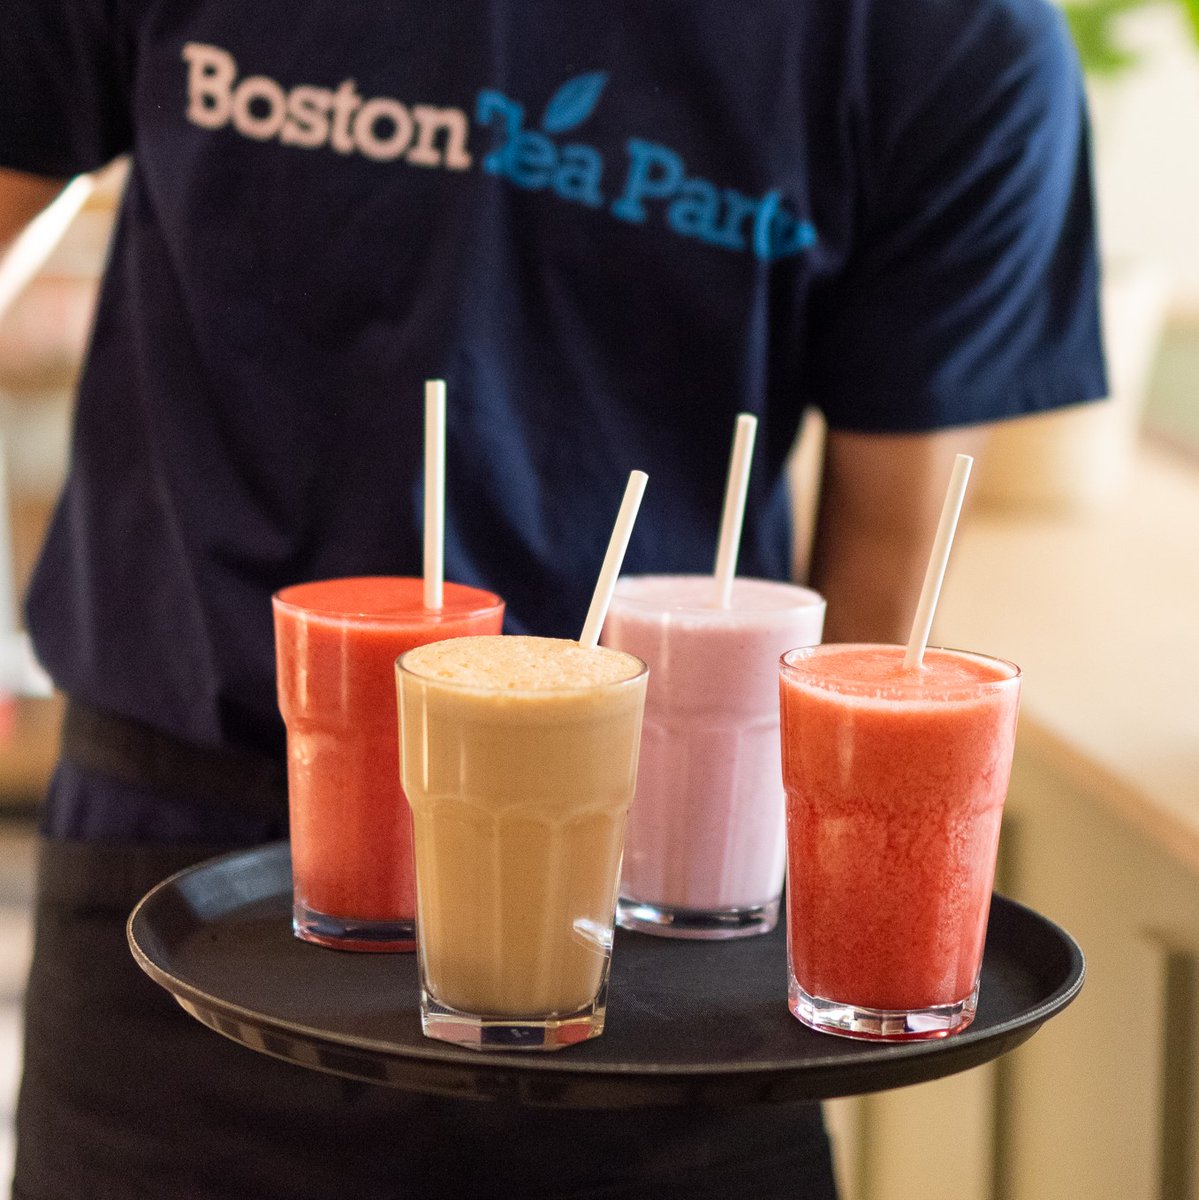 😎 Kick back and cool off with us this half-term. Homemade smoothies and shakes will keep them quiet . . . for a minute or two! . #summerdrinks #smoothies #milkshakes #btpcafes #homemade #homemadedrinks #brunch #kidsmenu